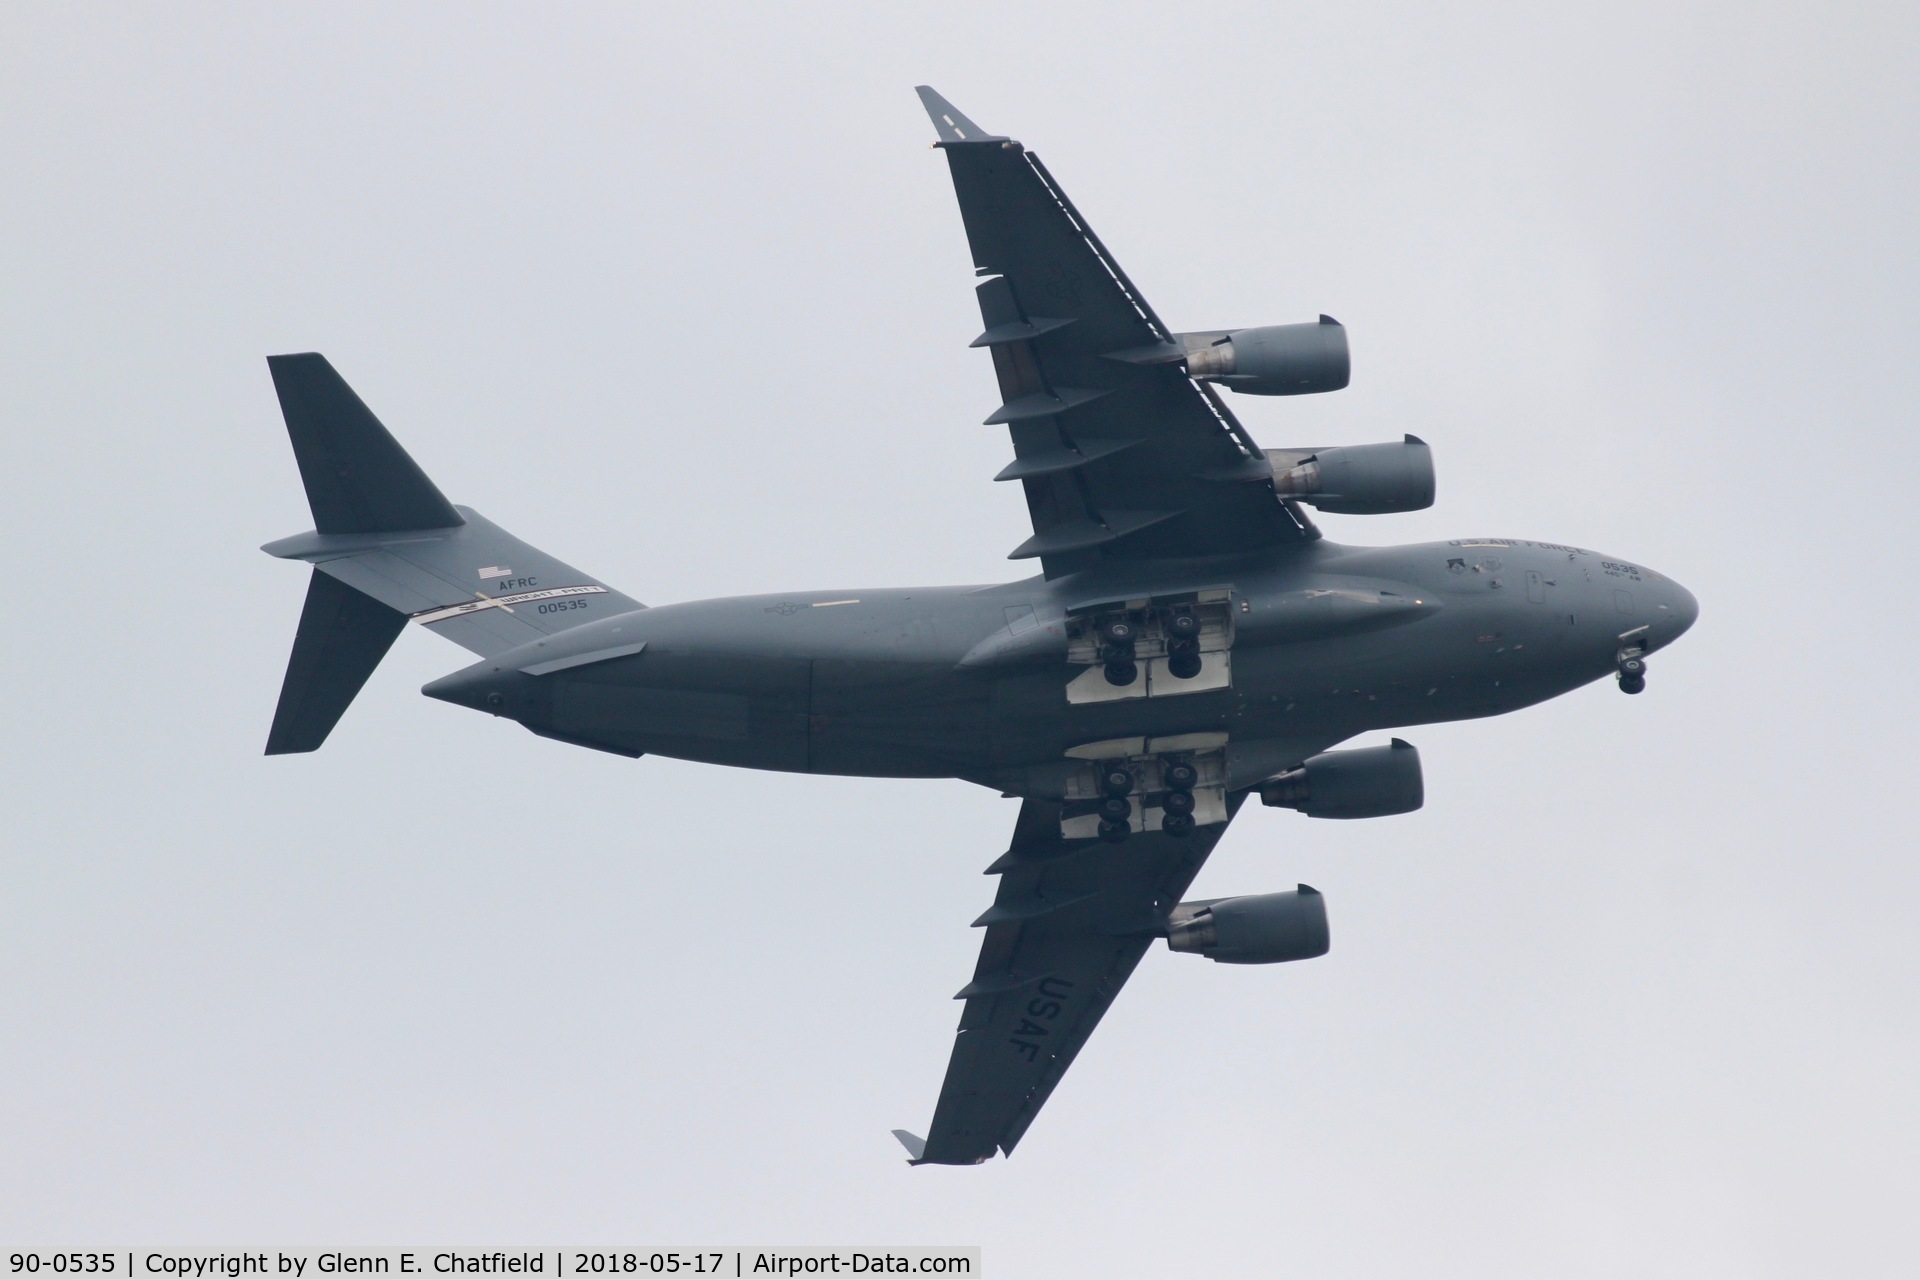 90-0535, 1990 Boeing C-17A Globemaster III C/N P-10, Overflying the National Museum of the USAF while on final approach for Patterson Field, Wright-Patterson AFB, OH